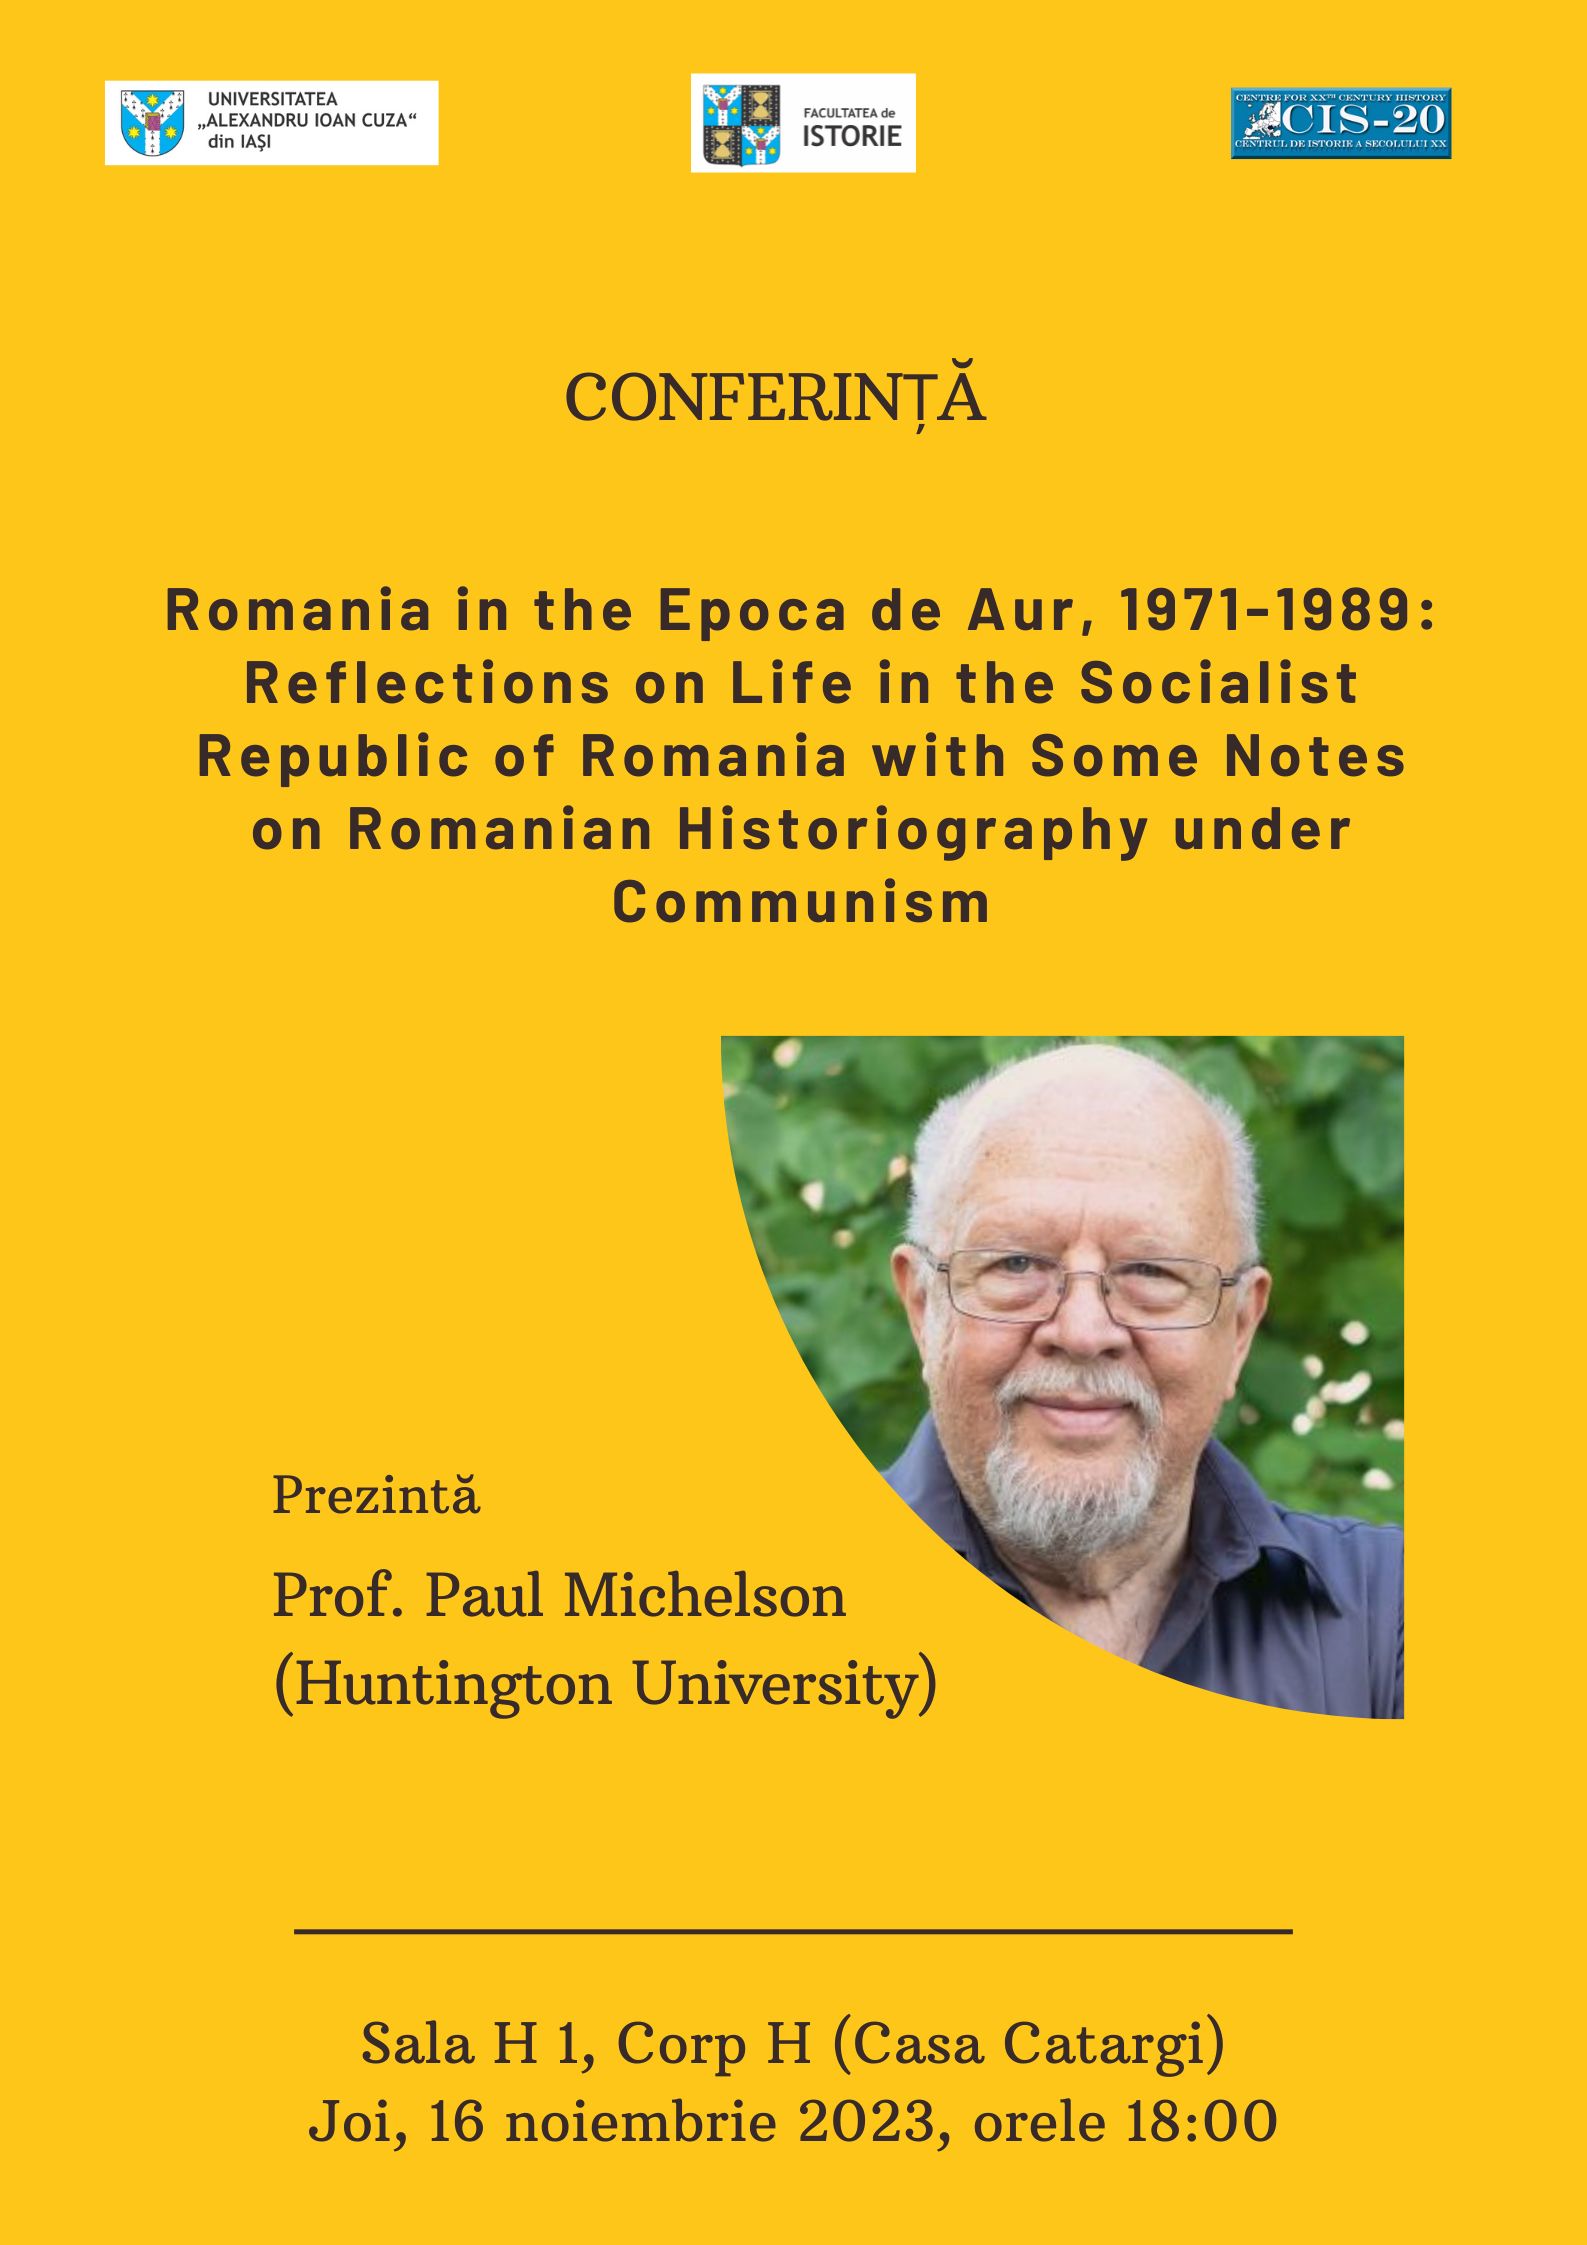 Conferință: Romania in the Epoca de Aur, 1971-1989: Reflections on Life in the Socialist Republic of Romania with Some Notes on Romanian Historiography under Communism.